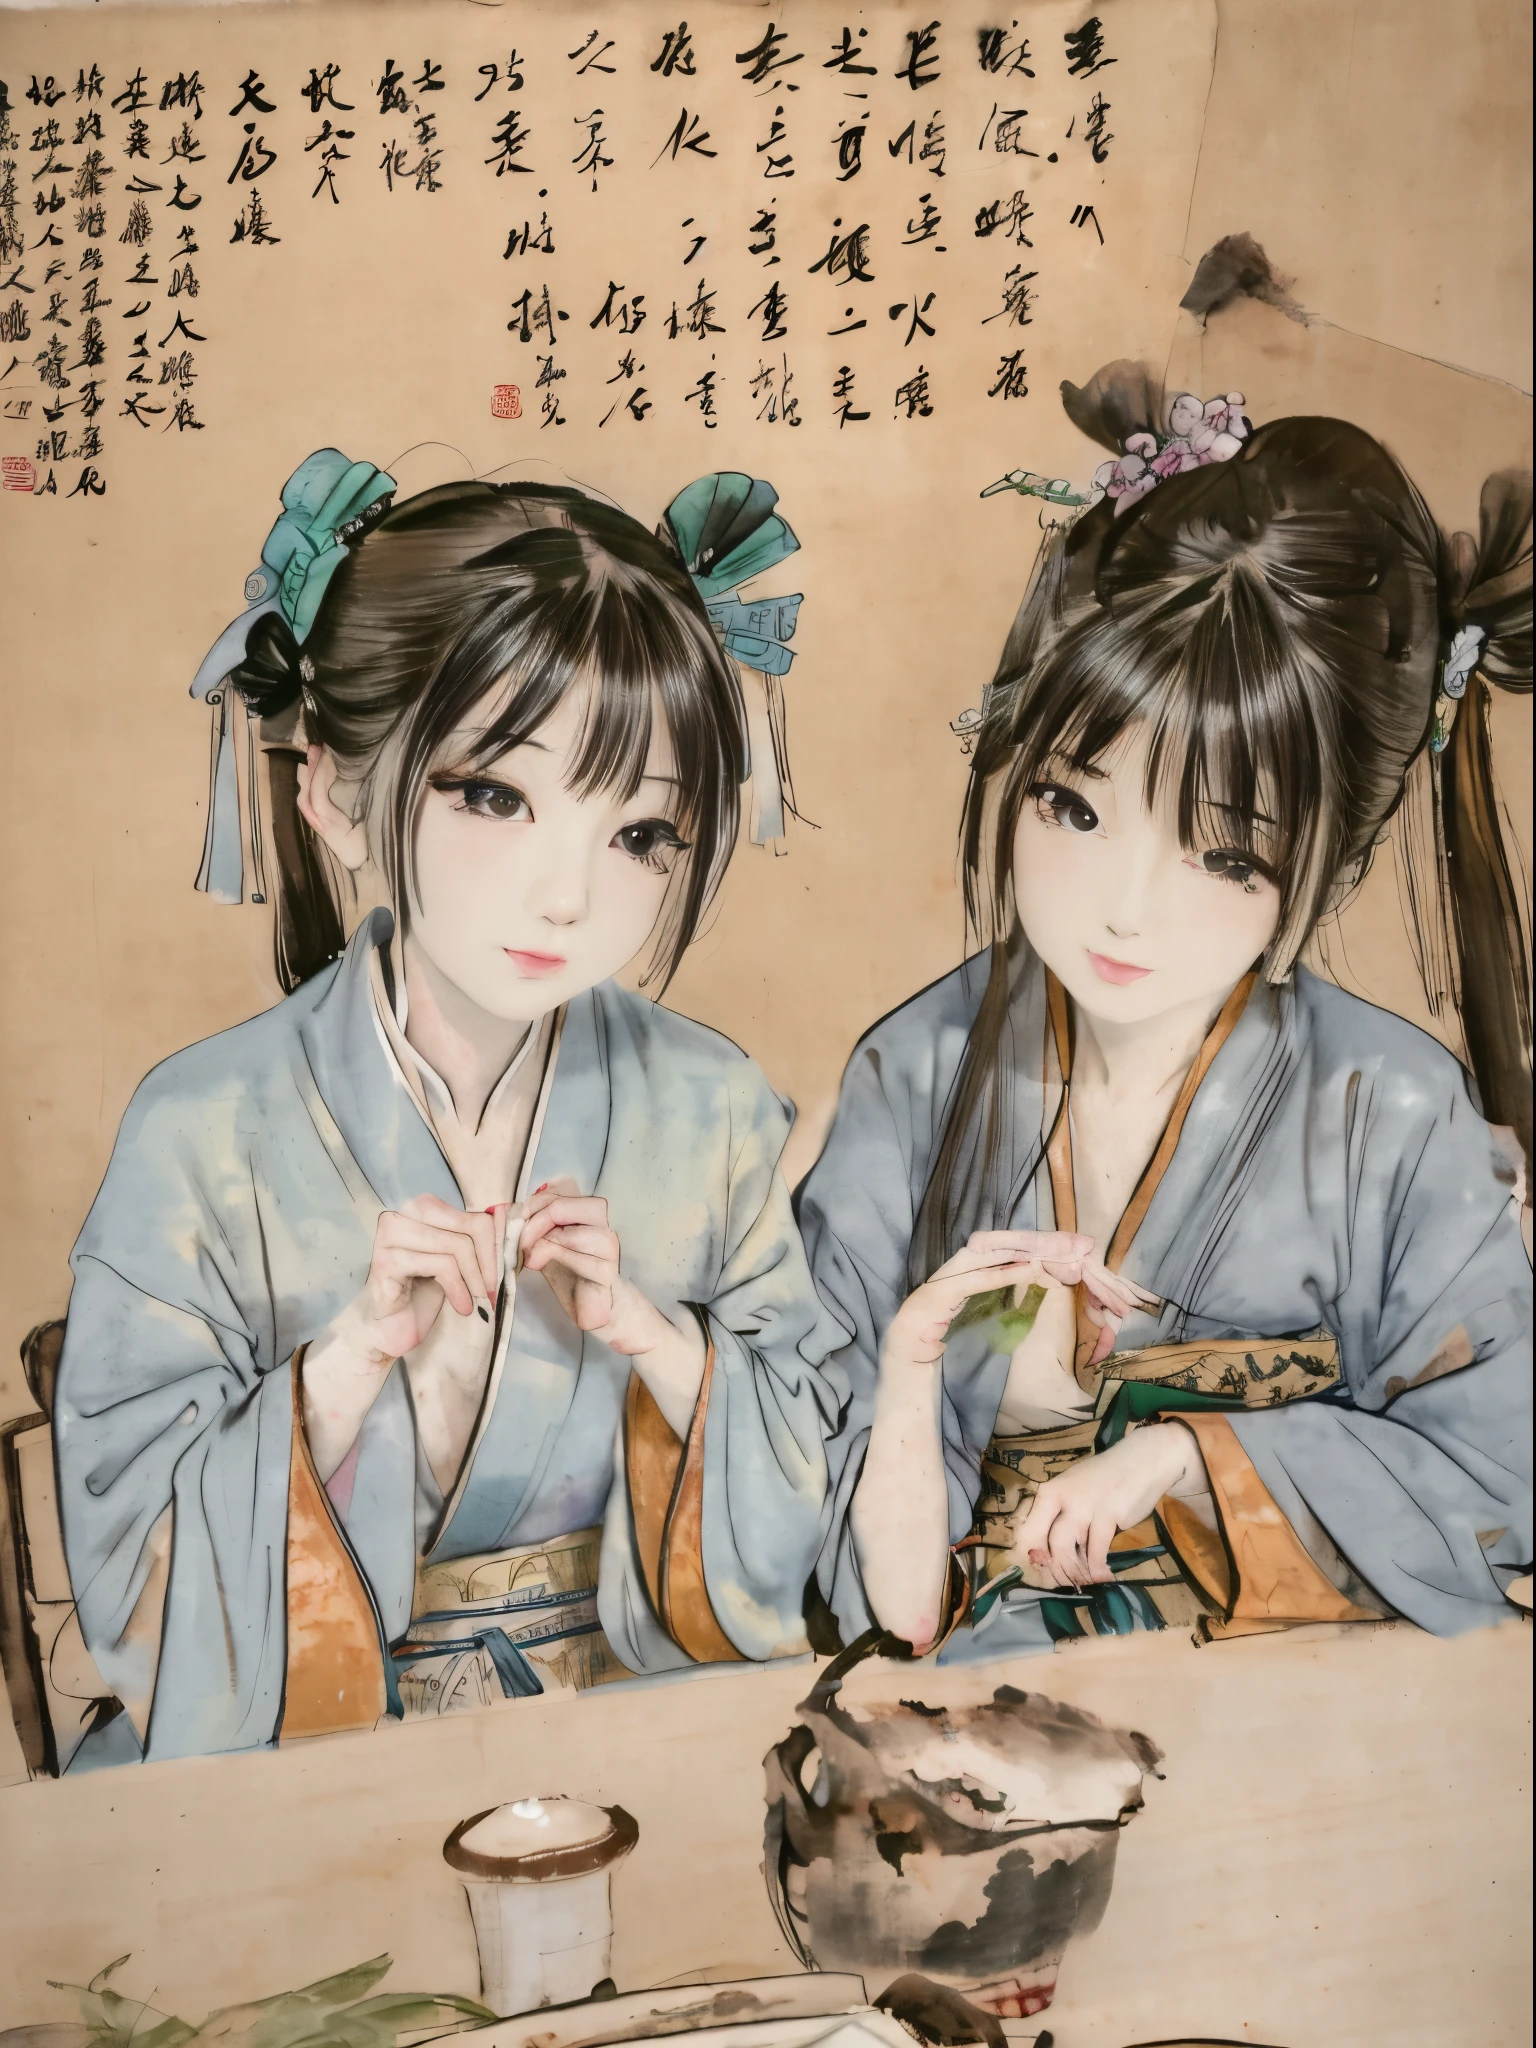 a close up of a full colour painting of people in a landscape, ancient chinese beauties, qing dynasty painting, by Wang Lü, su fu, mu pan, by Lü Ji, song dynasty, ancient china art style, chinese painting, robed figures sat around a table, by Wang Hui, by Yun Du-seo, old chines painting, traditional chinese painting